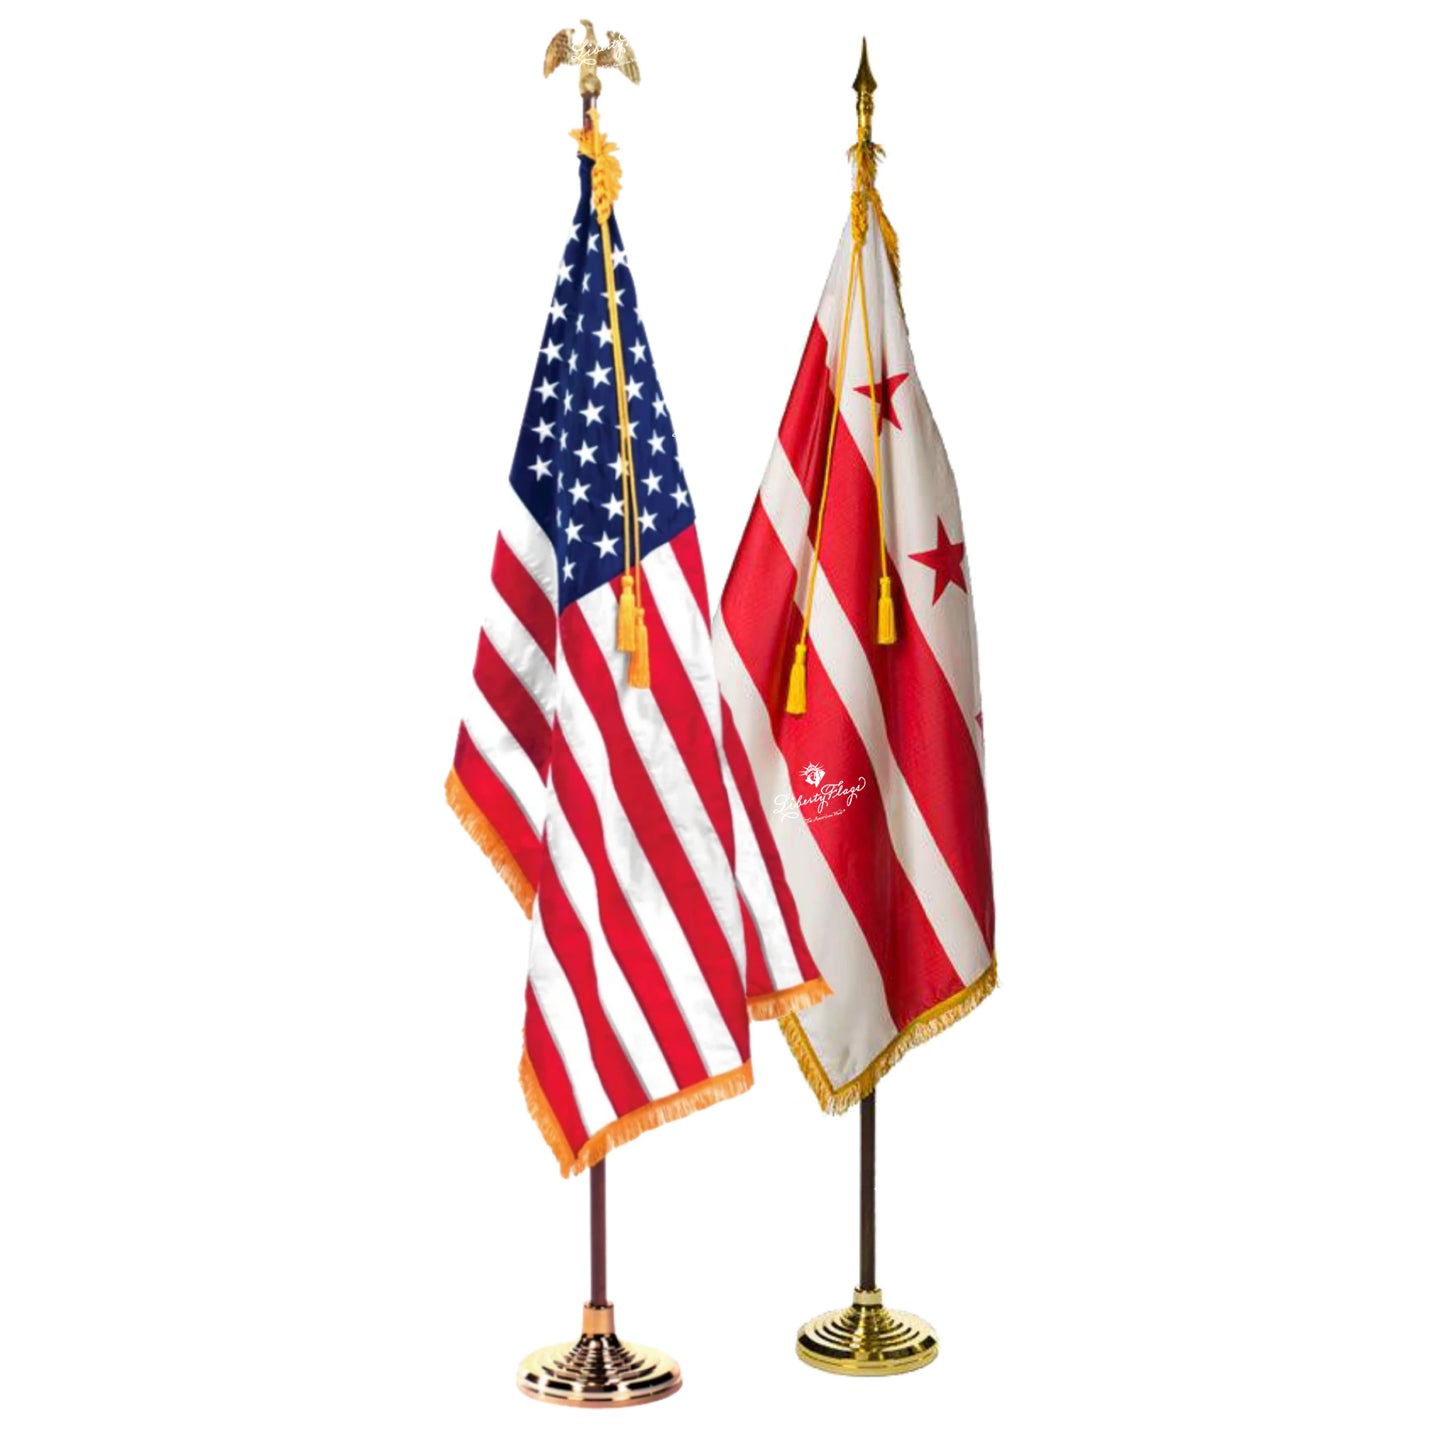 District of Columbia and U.S. Ceremonial Pairs